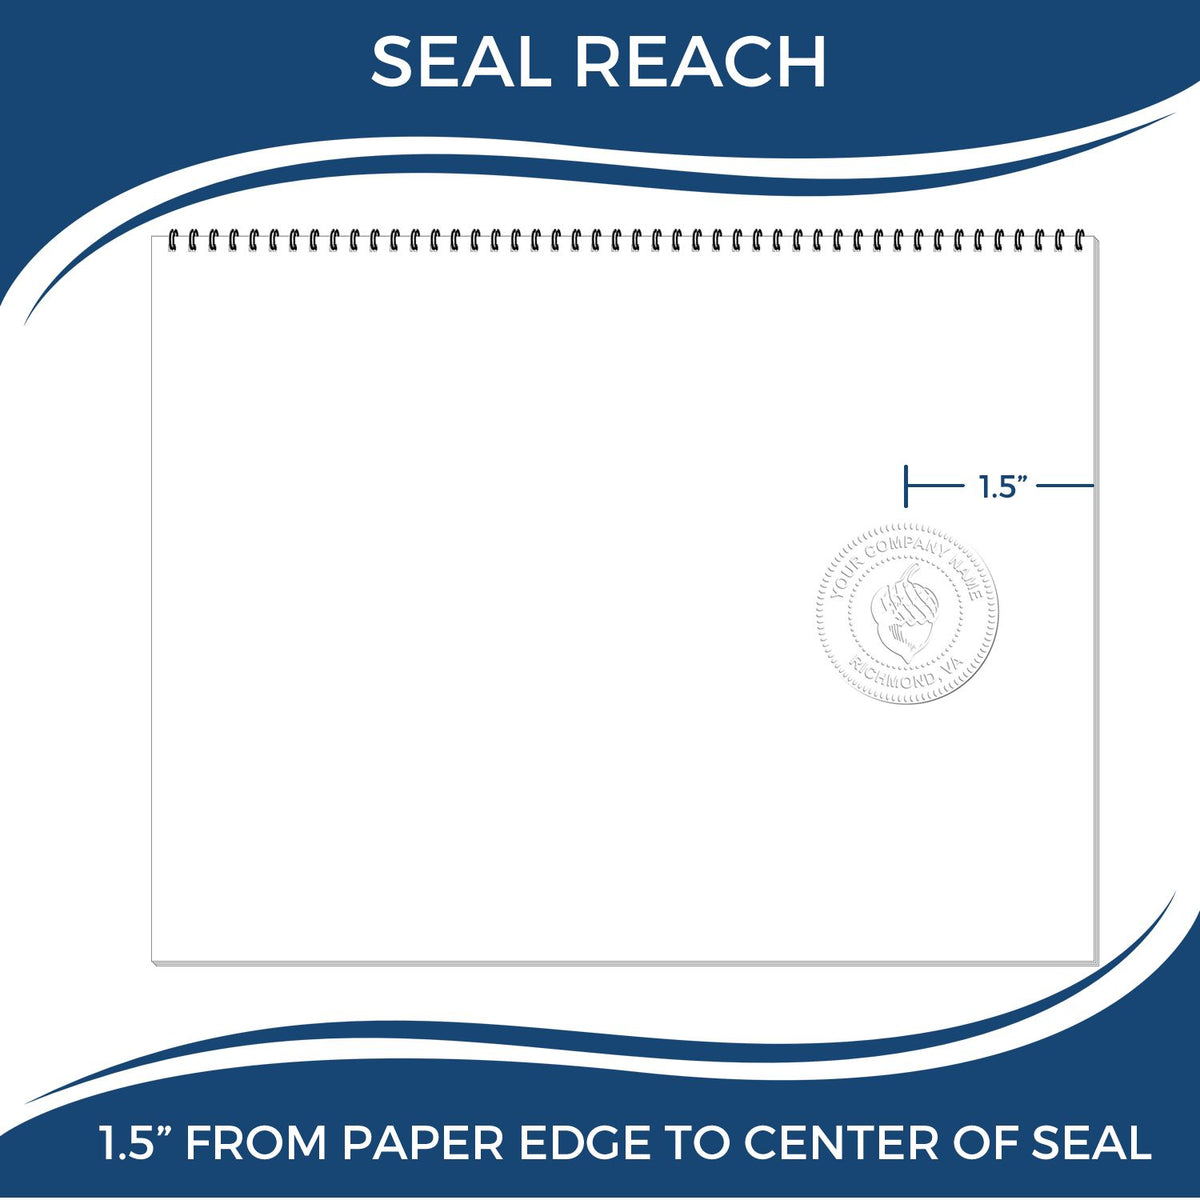 An infographic showing the seal reach which is represented by a ruler and a miniature seal image of the Soft Pennsylvania Professional Geologist Seal